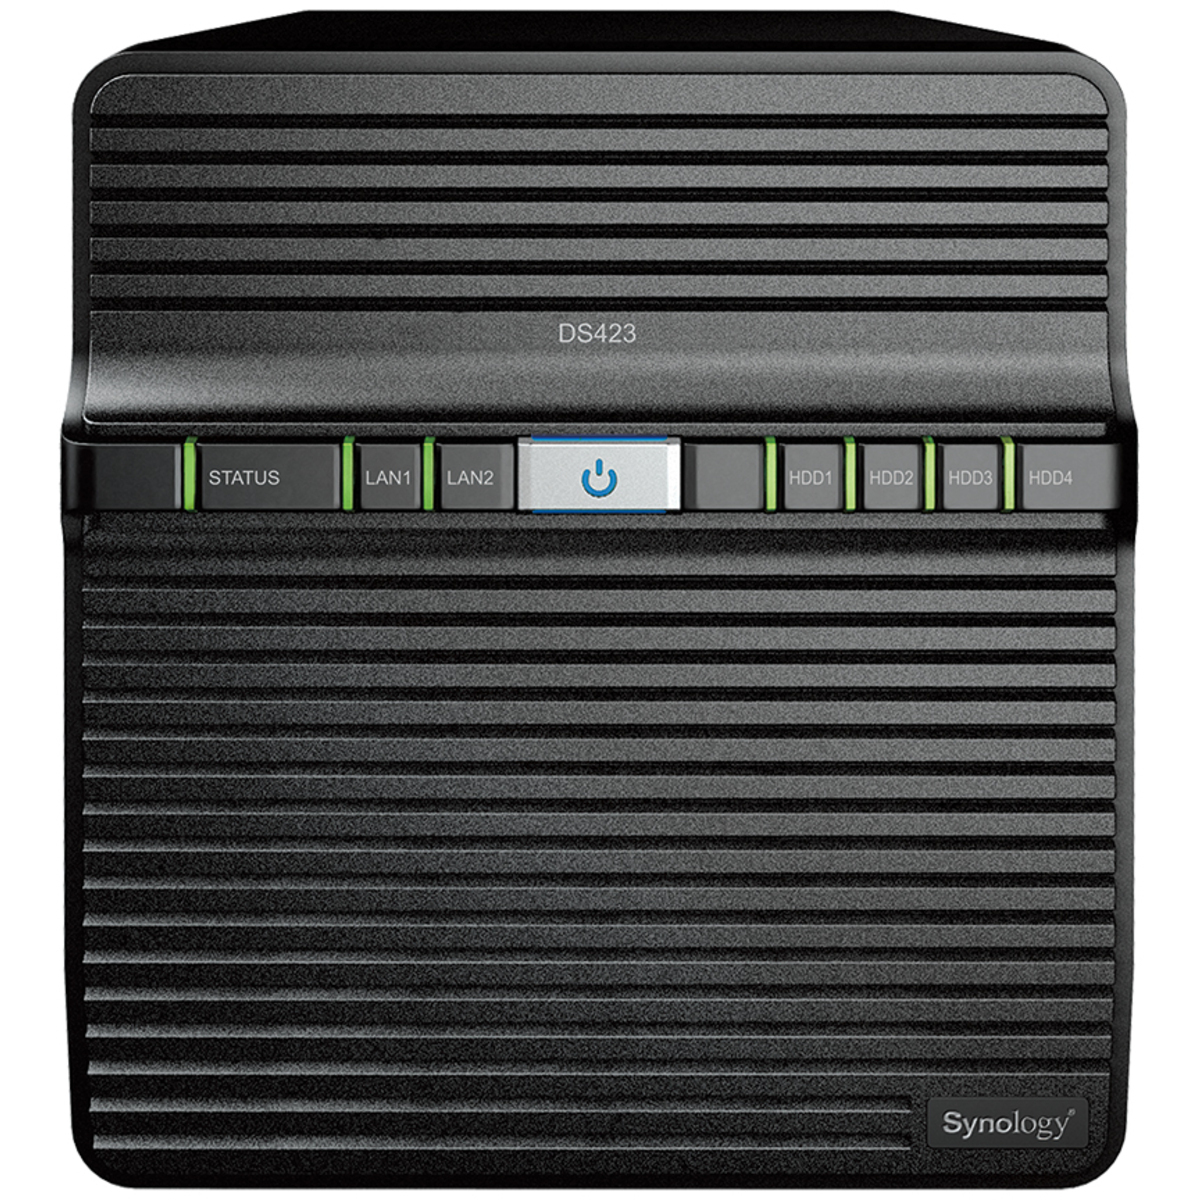 Synology DiskStation DS423 6tb 4-Bay Desktop Personal / Basic Home / Small Office NAS - Network Attached Storage Device 3x2tb Sandisk Ultra 3D SDSSDH3-2T00 2.5 560/520MB/s SATA 6Gb/s SSD CONSUMER Class Drives Installed - Burn-In Tested DiskStation DS423